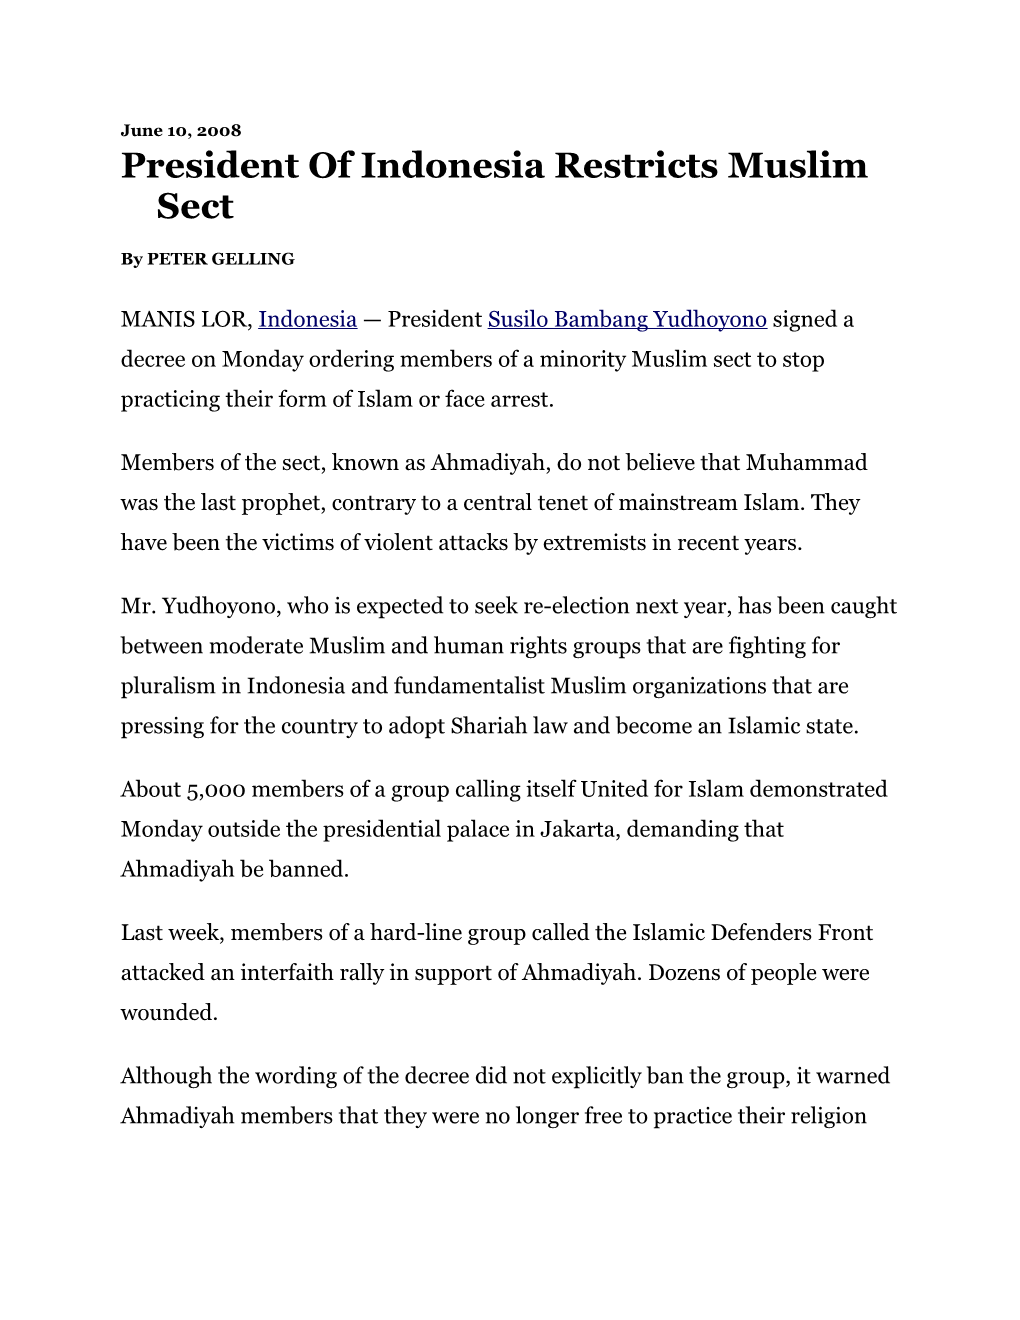 President of Indonesia Restricts Muslim Sect